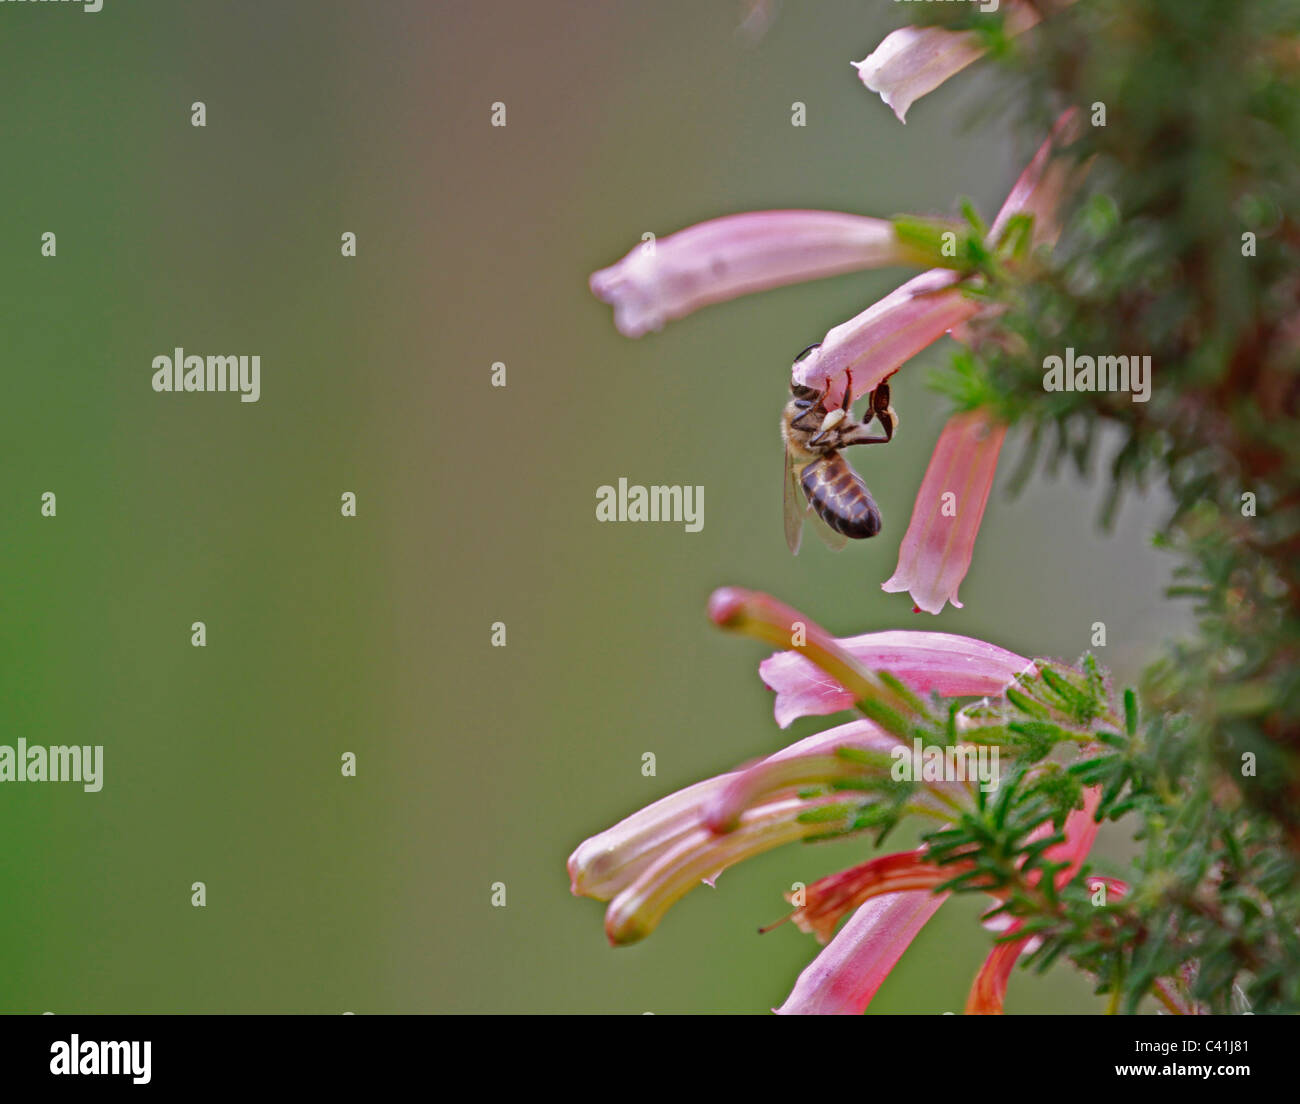 Bee pollinating a Erica flower in Kirstenbosch Botanical Gardens, Cape Town, South Africa. Stock Photo